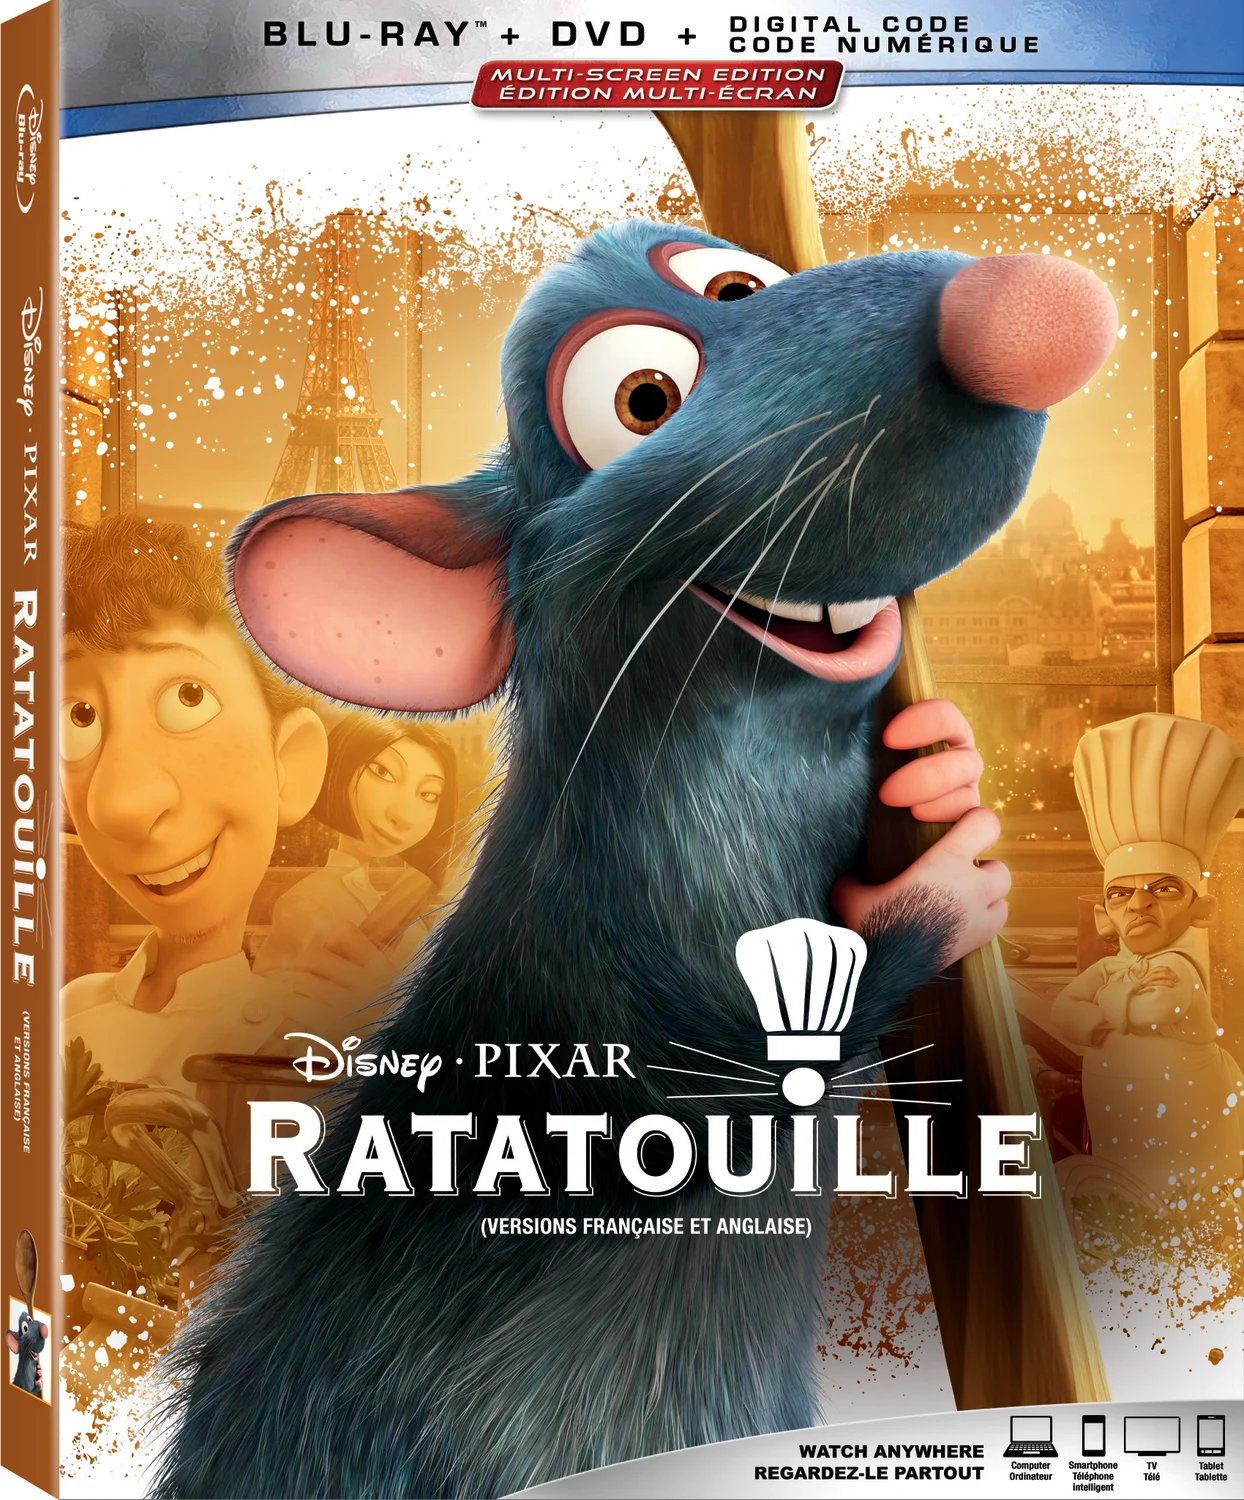 Ratatouille (2019 re-issue) (Blu-ray/DVD Combo) on MovieShack